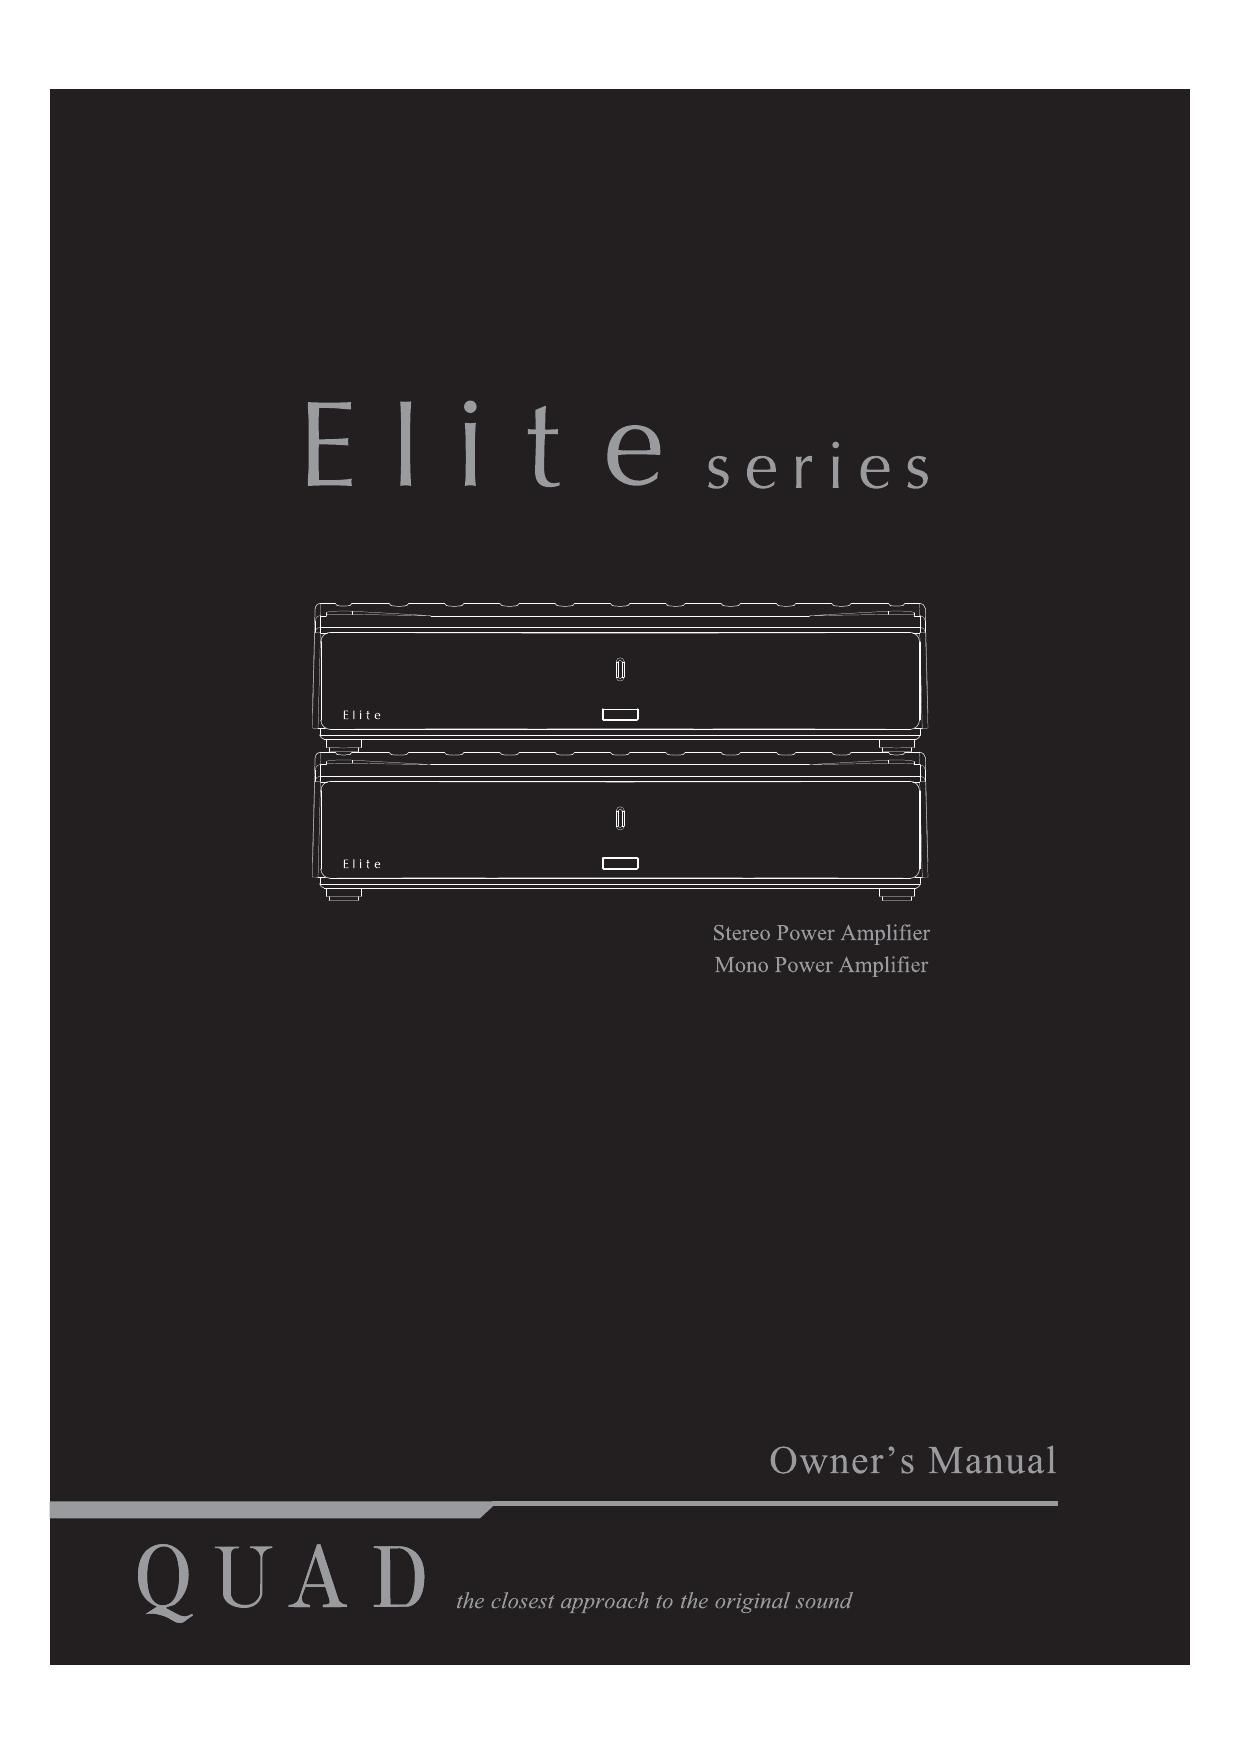 Quad Elite Stereo Owners Manual